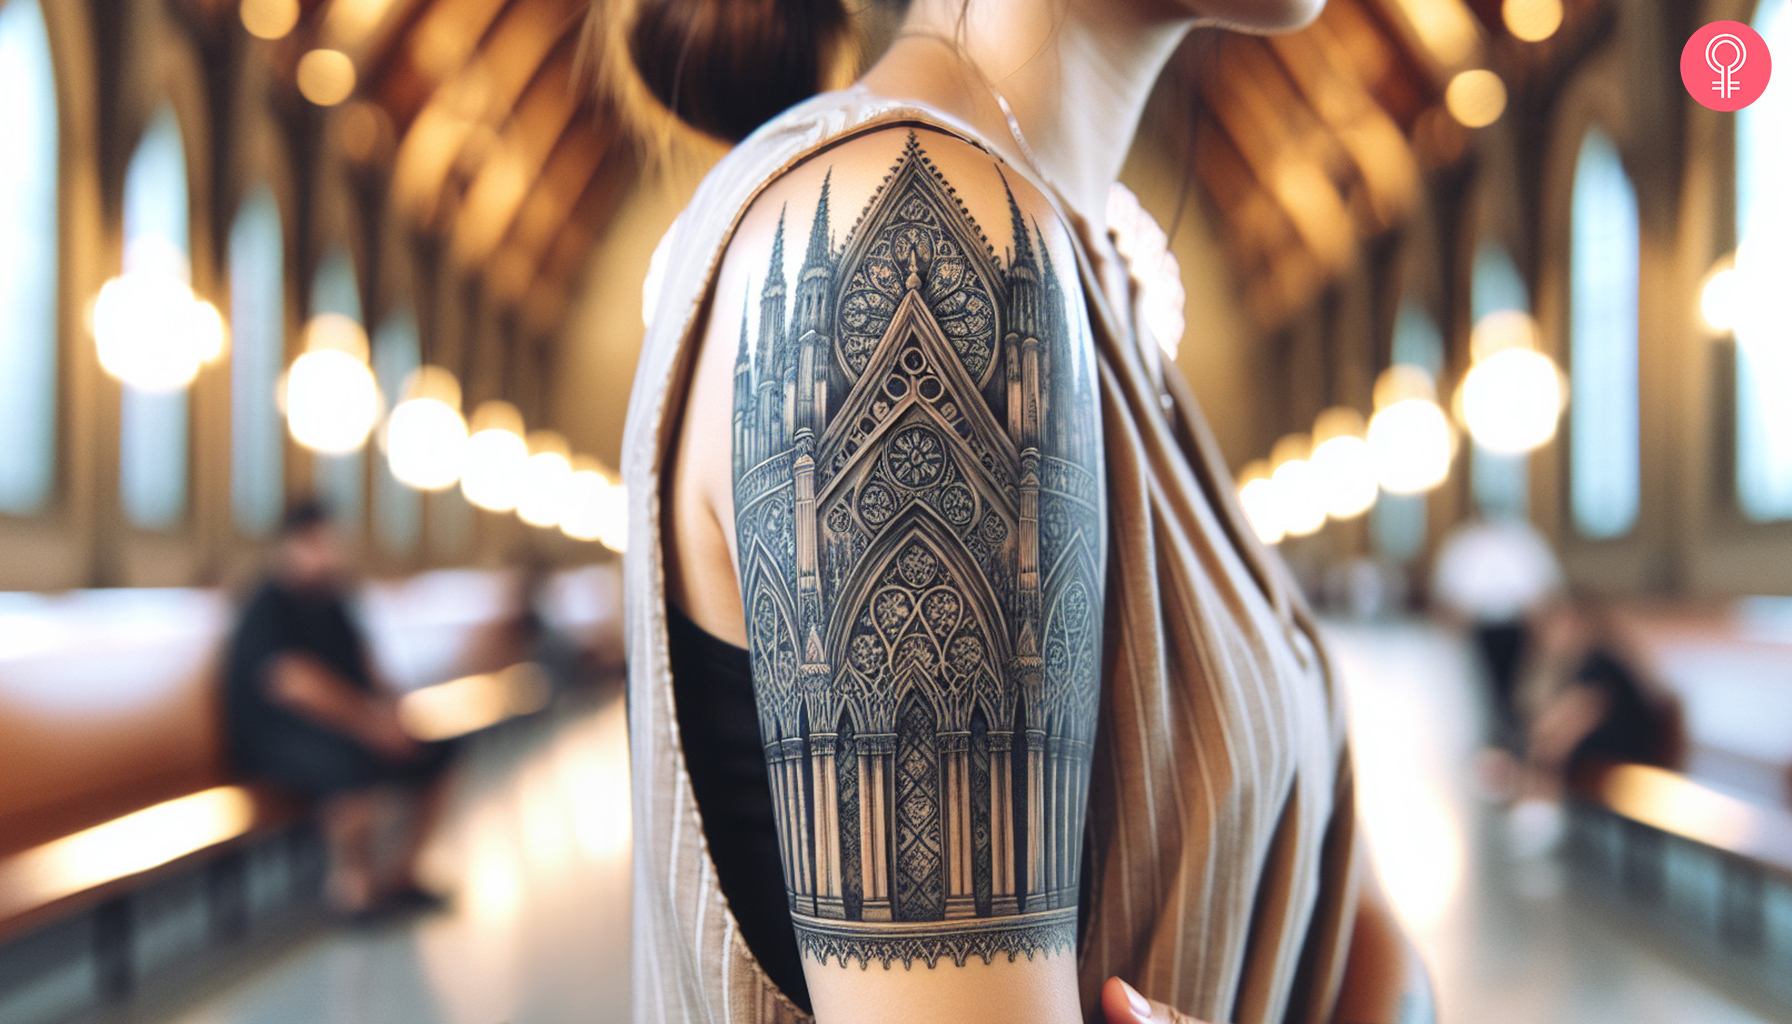 A cathedral half sleeve tattoo on the upper arm